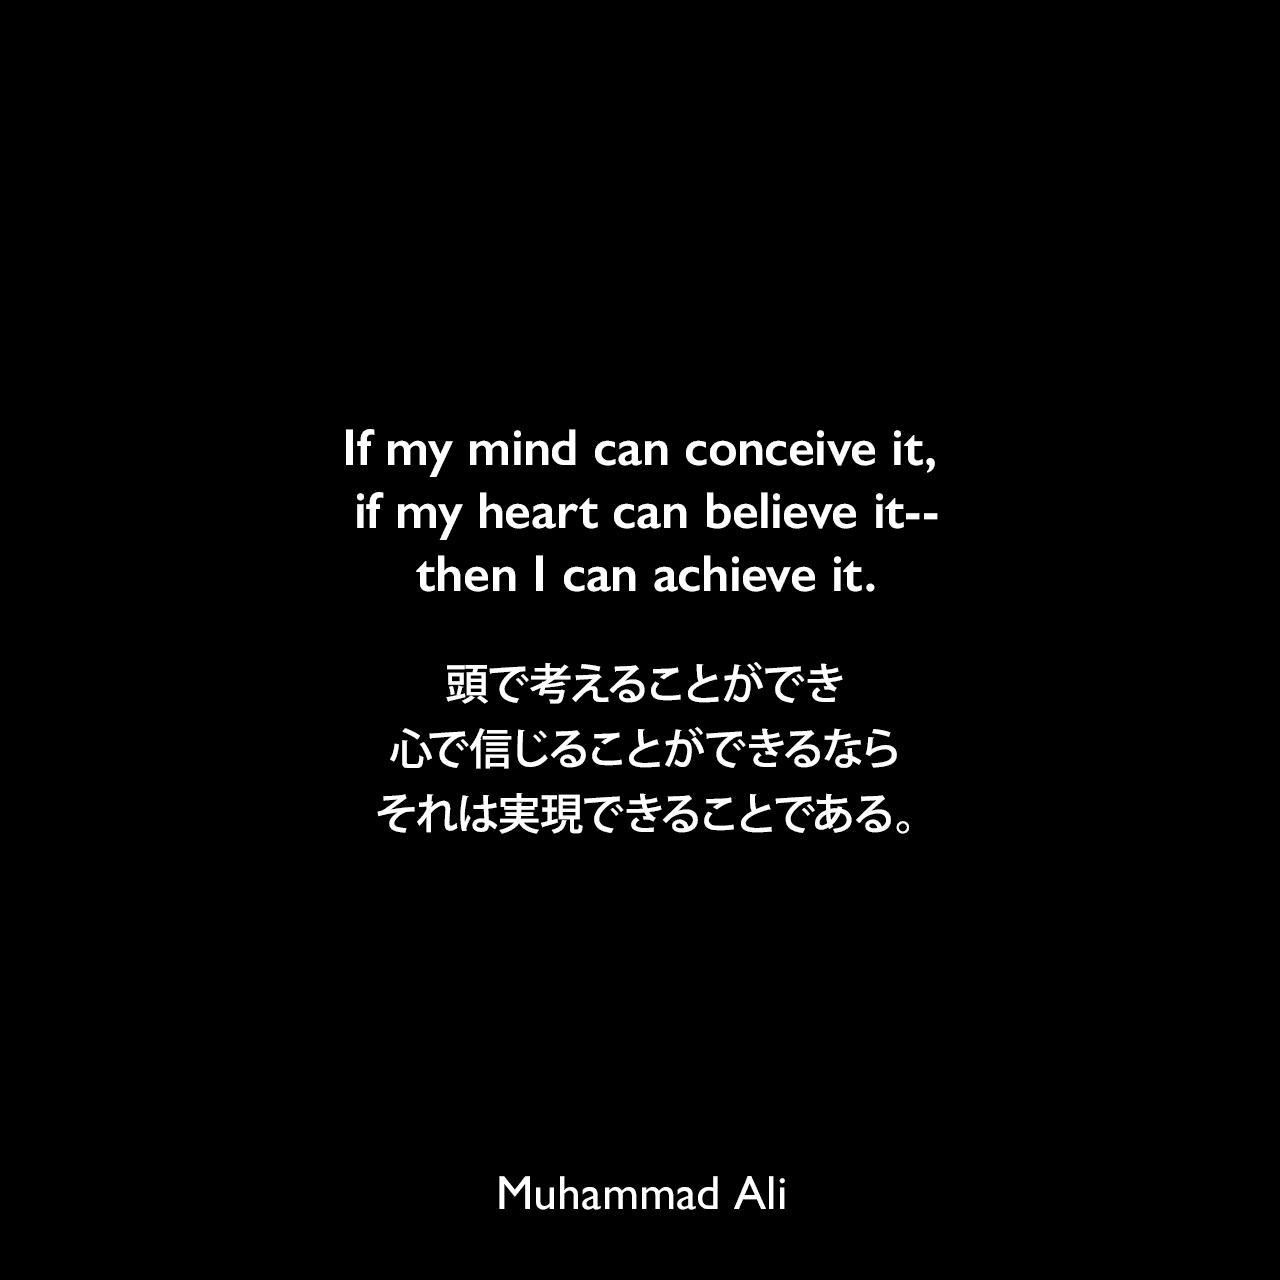 If my mind can conceive it, if my heart can believe it--then I can achieve it.頭で考えることができ、心で信じることができるなら、それは実現できることである。Muhammad Ali